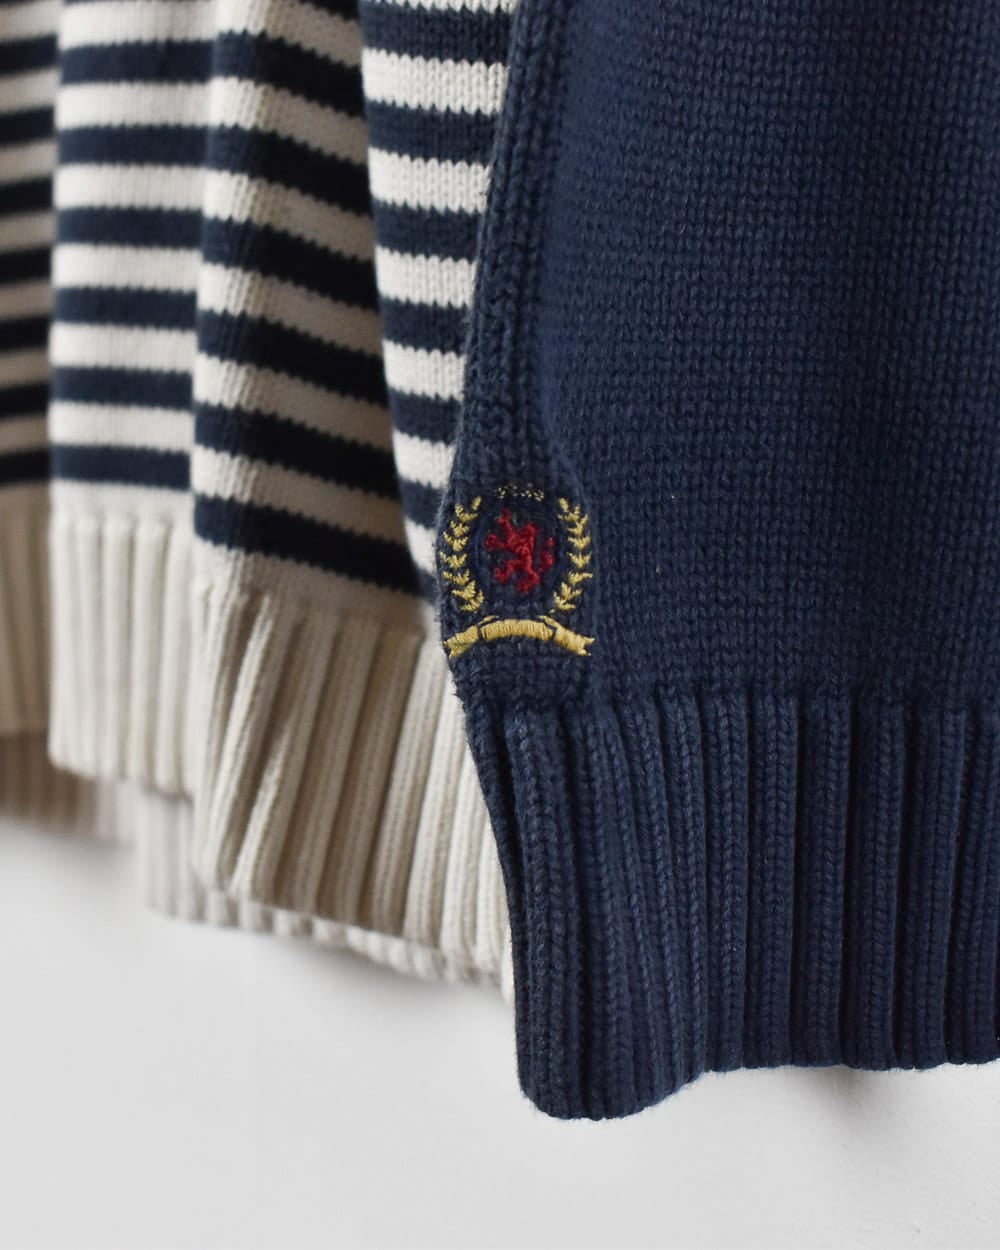 Navy Tommy Hilfiger Striped Knitted Sweatshirt - Small